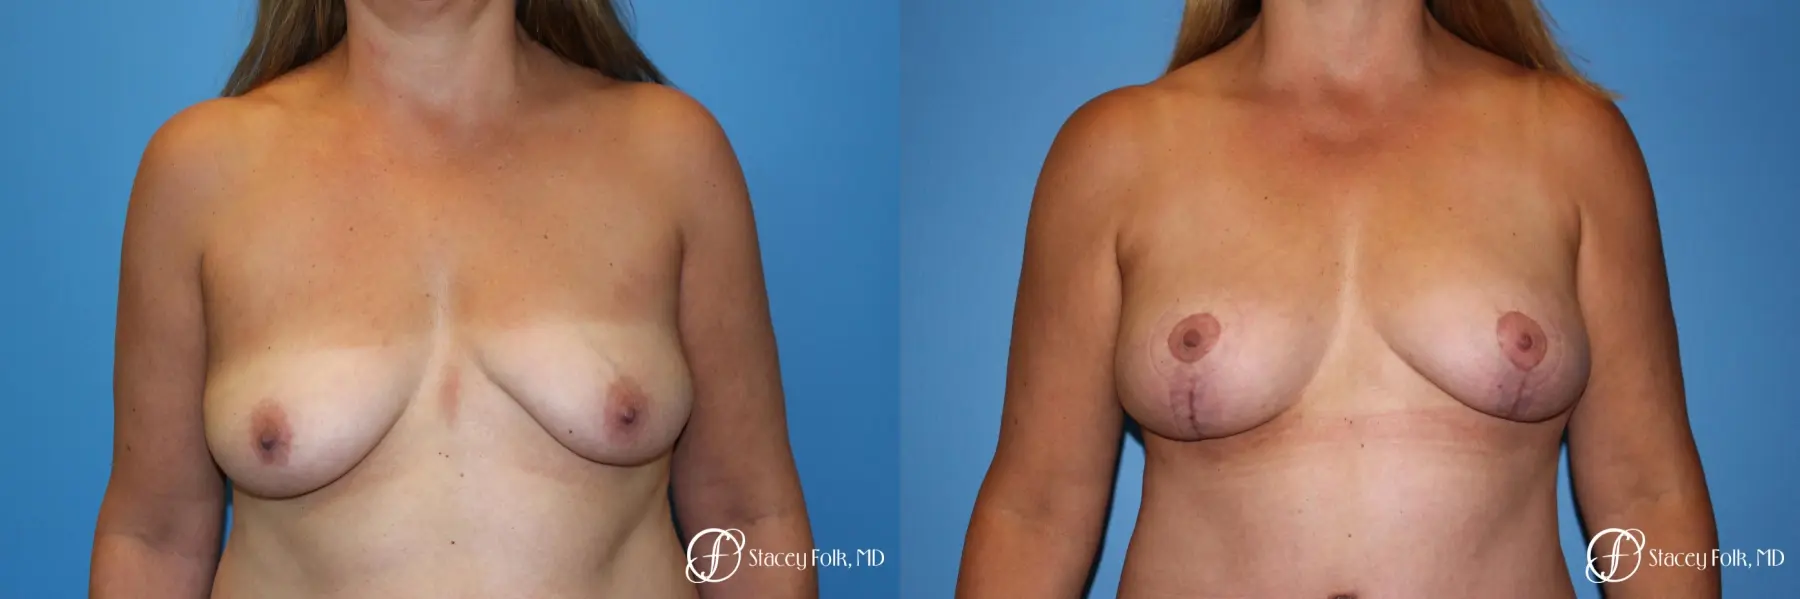 Denver Fat Transfer Breast Lift Mastopexy with Fat Transfer to the Breast 6920 - Before and After